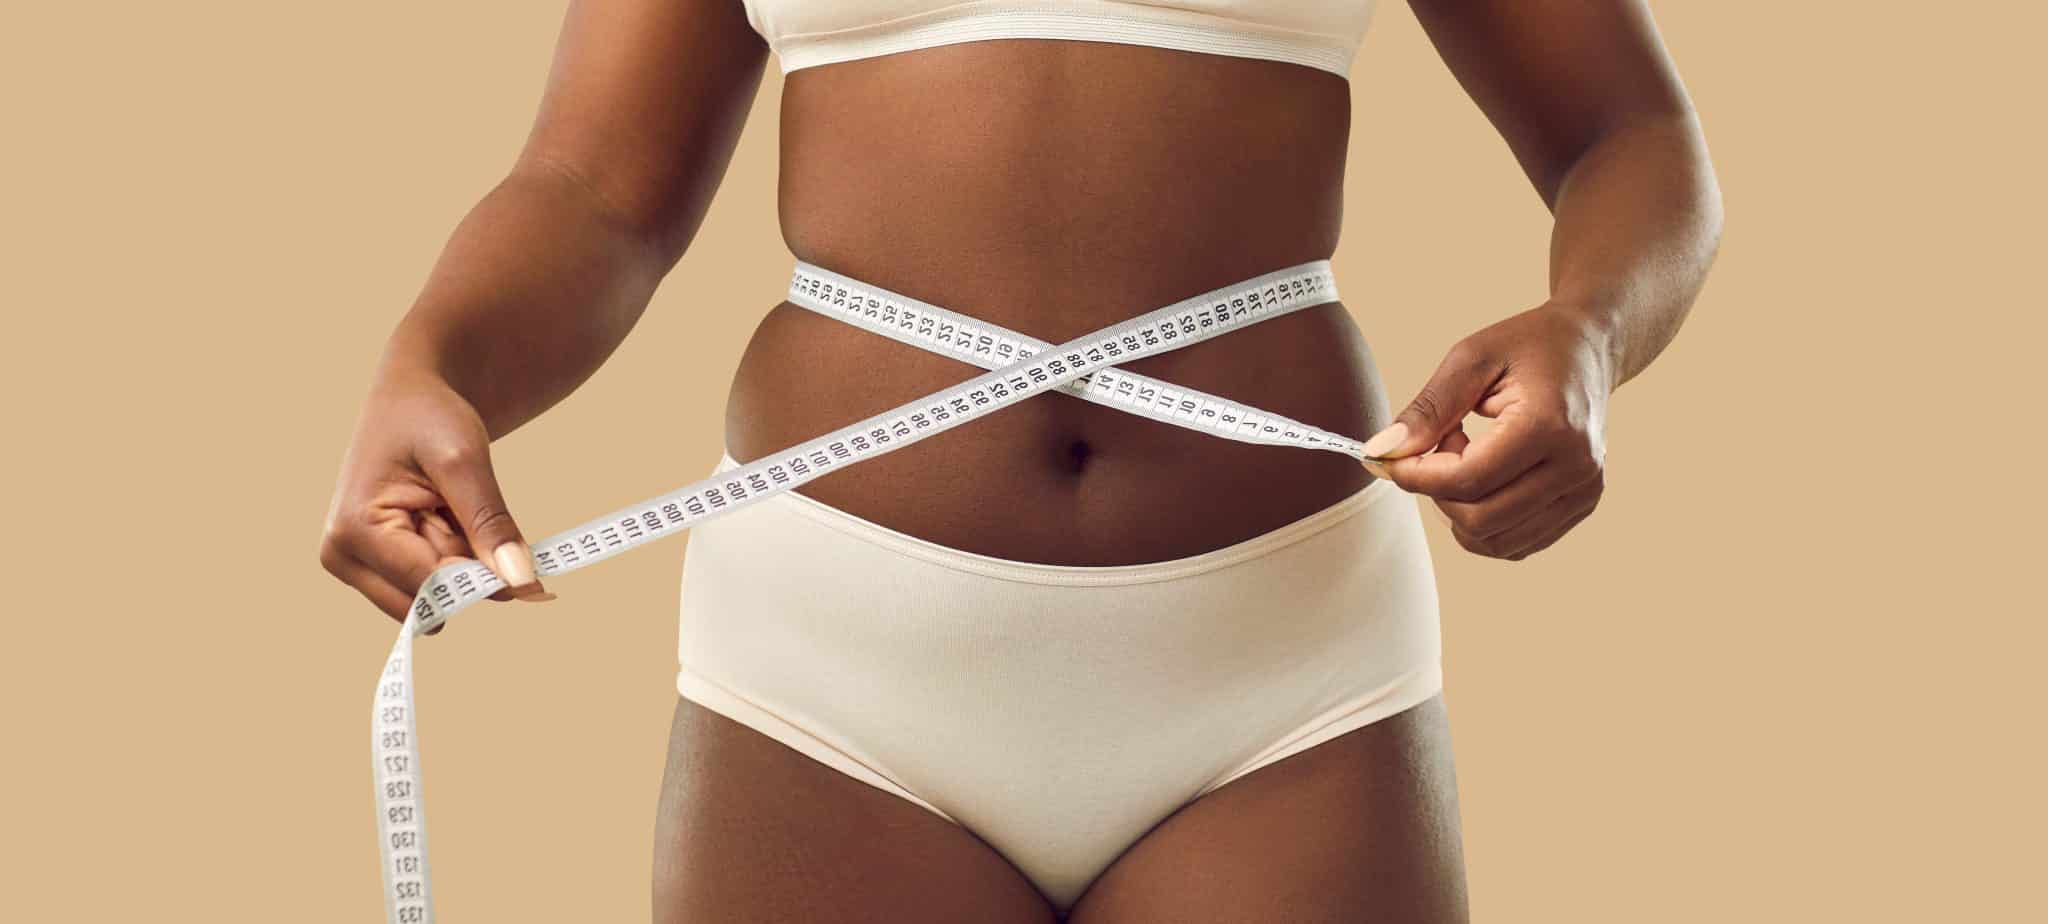 Africa Facts Zone on X: BBL surgeries are surprisingly on the rise in  South Africa, a country with many naturally endowed women. A perfect summer  body surgery costs $11,800 (R200,000) in South